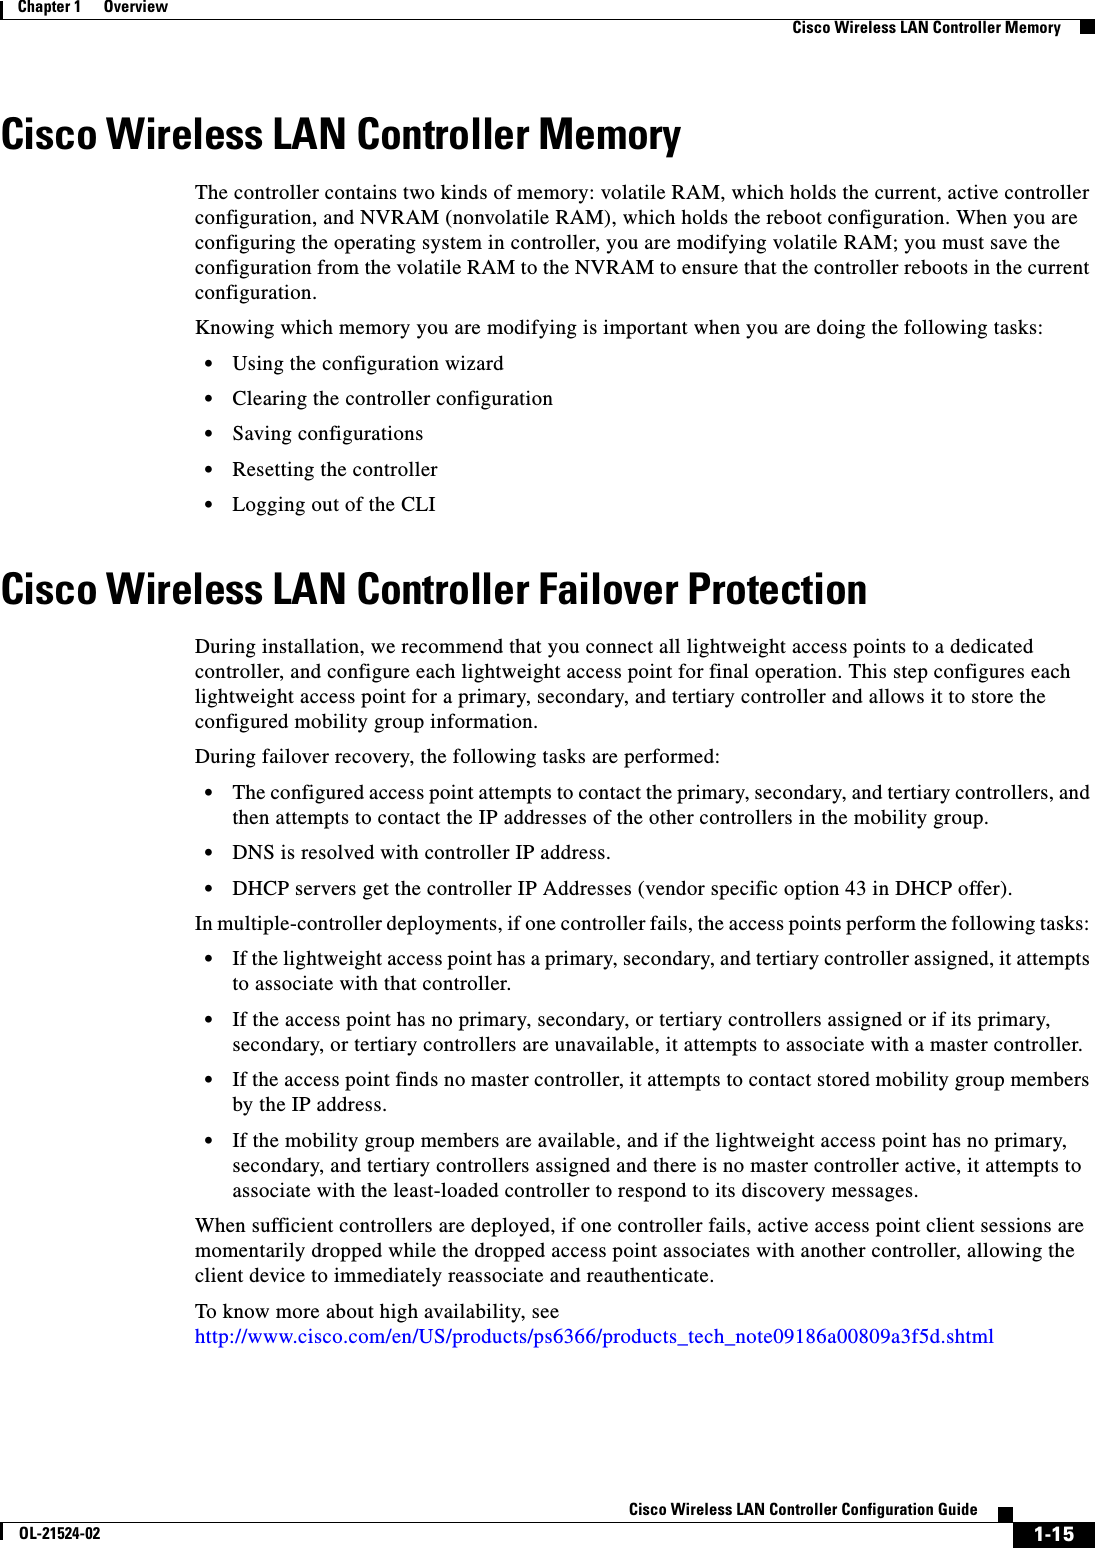  1-15Cisco Wireless LAN Controller Configuration GuideOL-21524-02Chapter 1      OverviewCisco Wireless LAN Controller MemoryCisco Wireless LAN Controller MemoryThe controller contains two kinds of memory: volatile RAM, which holds the current, active controller configuration, and NVRAM (nonvolatile RAM), which holds the reboot configuration. When you are configuring the operating system in controller, you are modifying volatile RAM; you must save the configuration from the volatile RAM to the NVRAM to ensure that the controller reboots in the current configuration.Knowing which memory you are modifying is important when you are doing the following tasks:  • Using the configuration wizard   • Clearing the controller configuration  • Saving configurations  • Resetting the controller  • Logging out of the CLICisco Wireless LAN Controller Failover ProtectionDuring installation, we recommend that you connect all lightweight access points to a dedicated controller, and configure each lightweight access point for final operation. This step configures each lightweight access point for a primary, secondary, and tertiary controller and allows it to store the configured mobility group information. During failover recovery, the following tasks are performed:  • The configured access point attempts to contact the primary, secondary, and tertiary controllers, and then attempts to contact the IP addresses of the other controllers in the mobility group.  • DNS is resolved with controller IP address.  • DHCP servers get the controller IP Addresses (vendor specific option 43 in DHCP offer).In multiple-controller deployments, if one controller fails, the access points perform the following tasks:   • If the lightweight access point has a primary, secondary, and tertiary controller assigned, it attempts to associate with that controller.  • If the access point has no primary, secondary, or tertiary controllers assigned or if its primary, secondary, or tertiary controllers are unavailable, it attempts to associate with a master controller.  • If the access point finds no master controller, it attempts to contact stored mobility group members by the IP address.  • If the mobility group members are available, and if the lightweight access point has no primary, secondary, and tertiary controllers assigned and there is no master controller active, it attempts to associate with the least-loaded controller to respond to its discovery messages. When sufficient controllers are deployed, if one controller fails, active access point client sessions are momentarily dropped while the dropped access point associates with another controller, allowing the client device to immediately reassociate and reauthenticate.To know more about high availability, see http://www.cisco.com/en/US/products/ps6366/products_tech_note09186a00809a3f5d.shtml